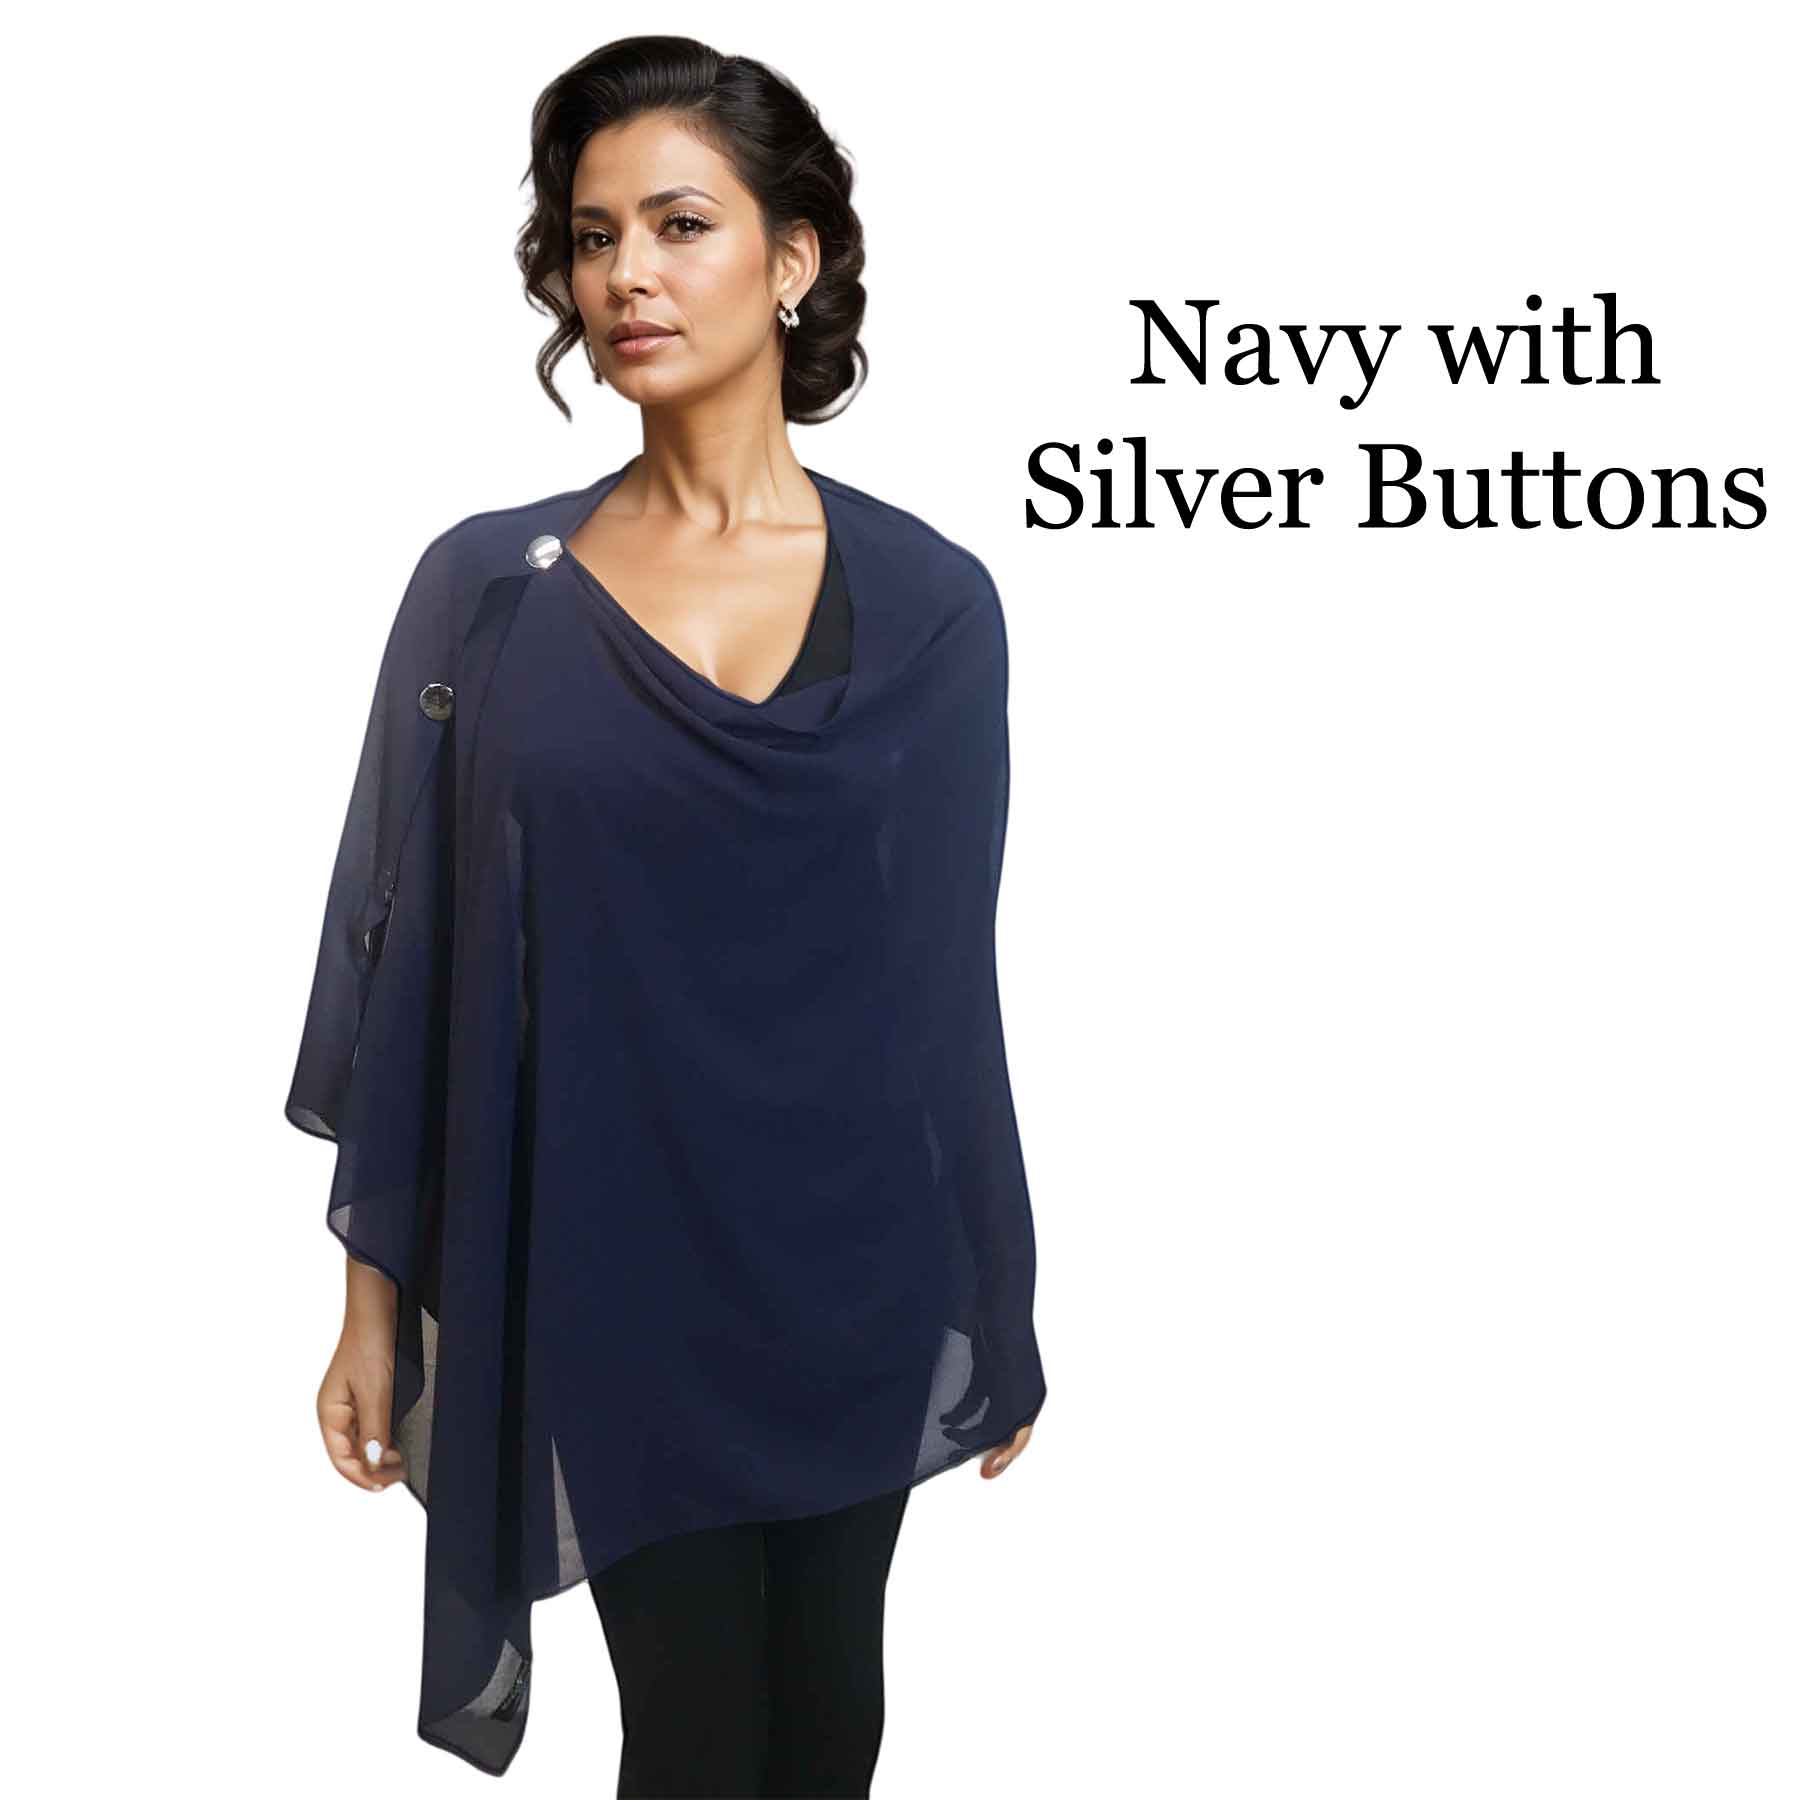 165S - Navy w/Silver Buttons<br>
Georgette Button Shawl

